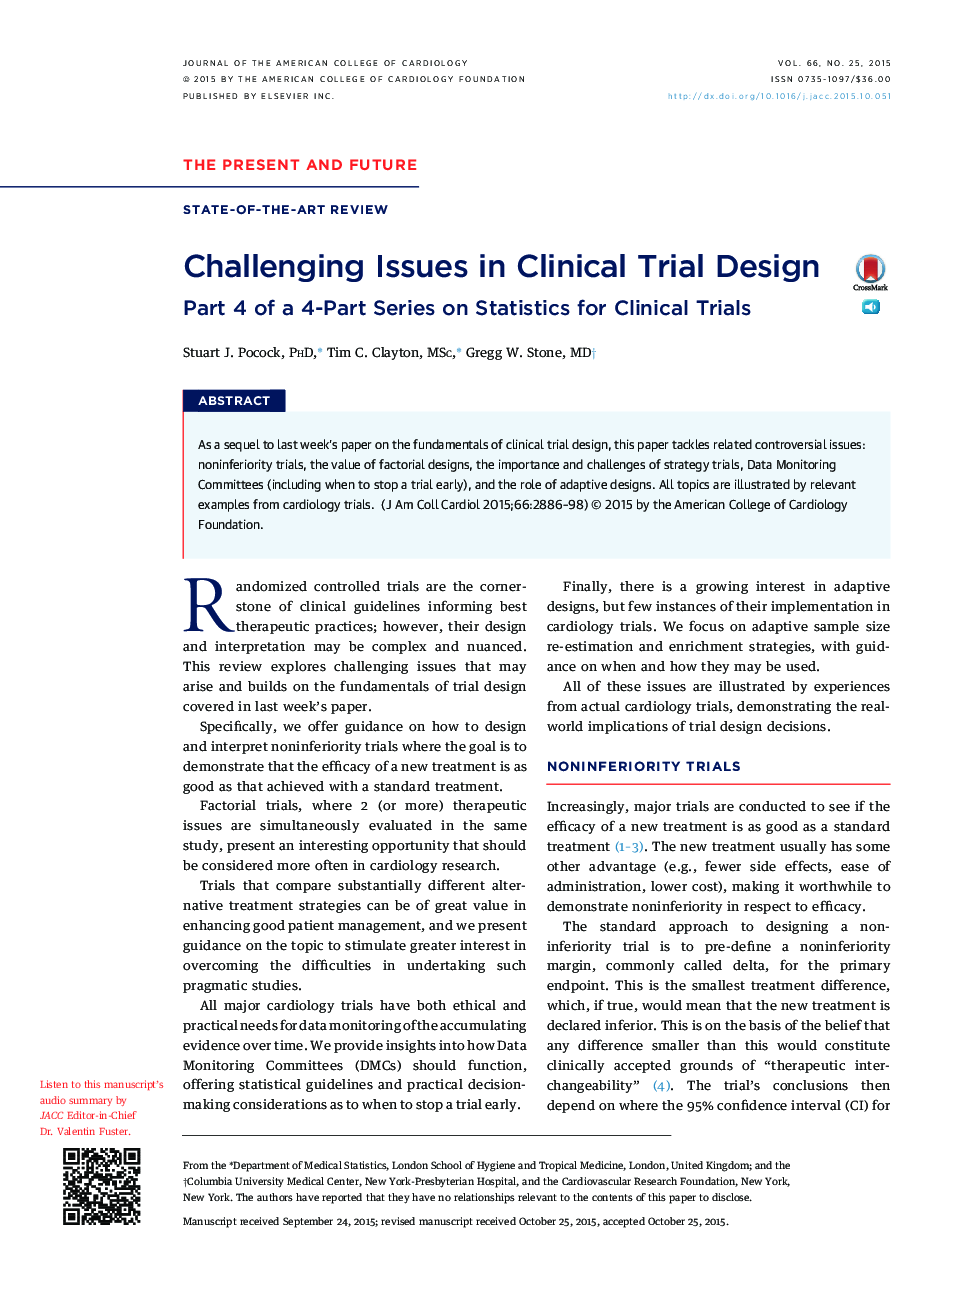 Challenging Issues in Clinical Trial Design: Part 4 of a 4-Part Series on Statistics for Clinical Trials